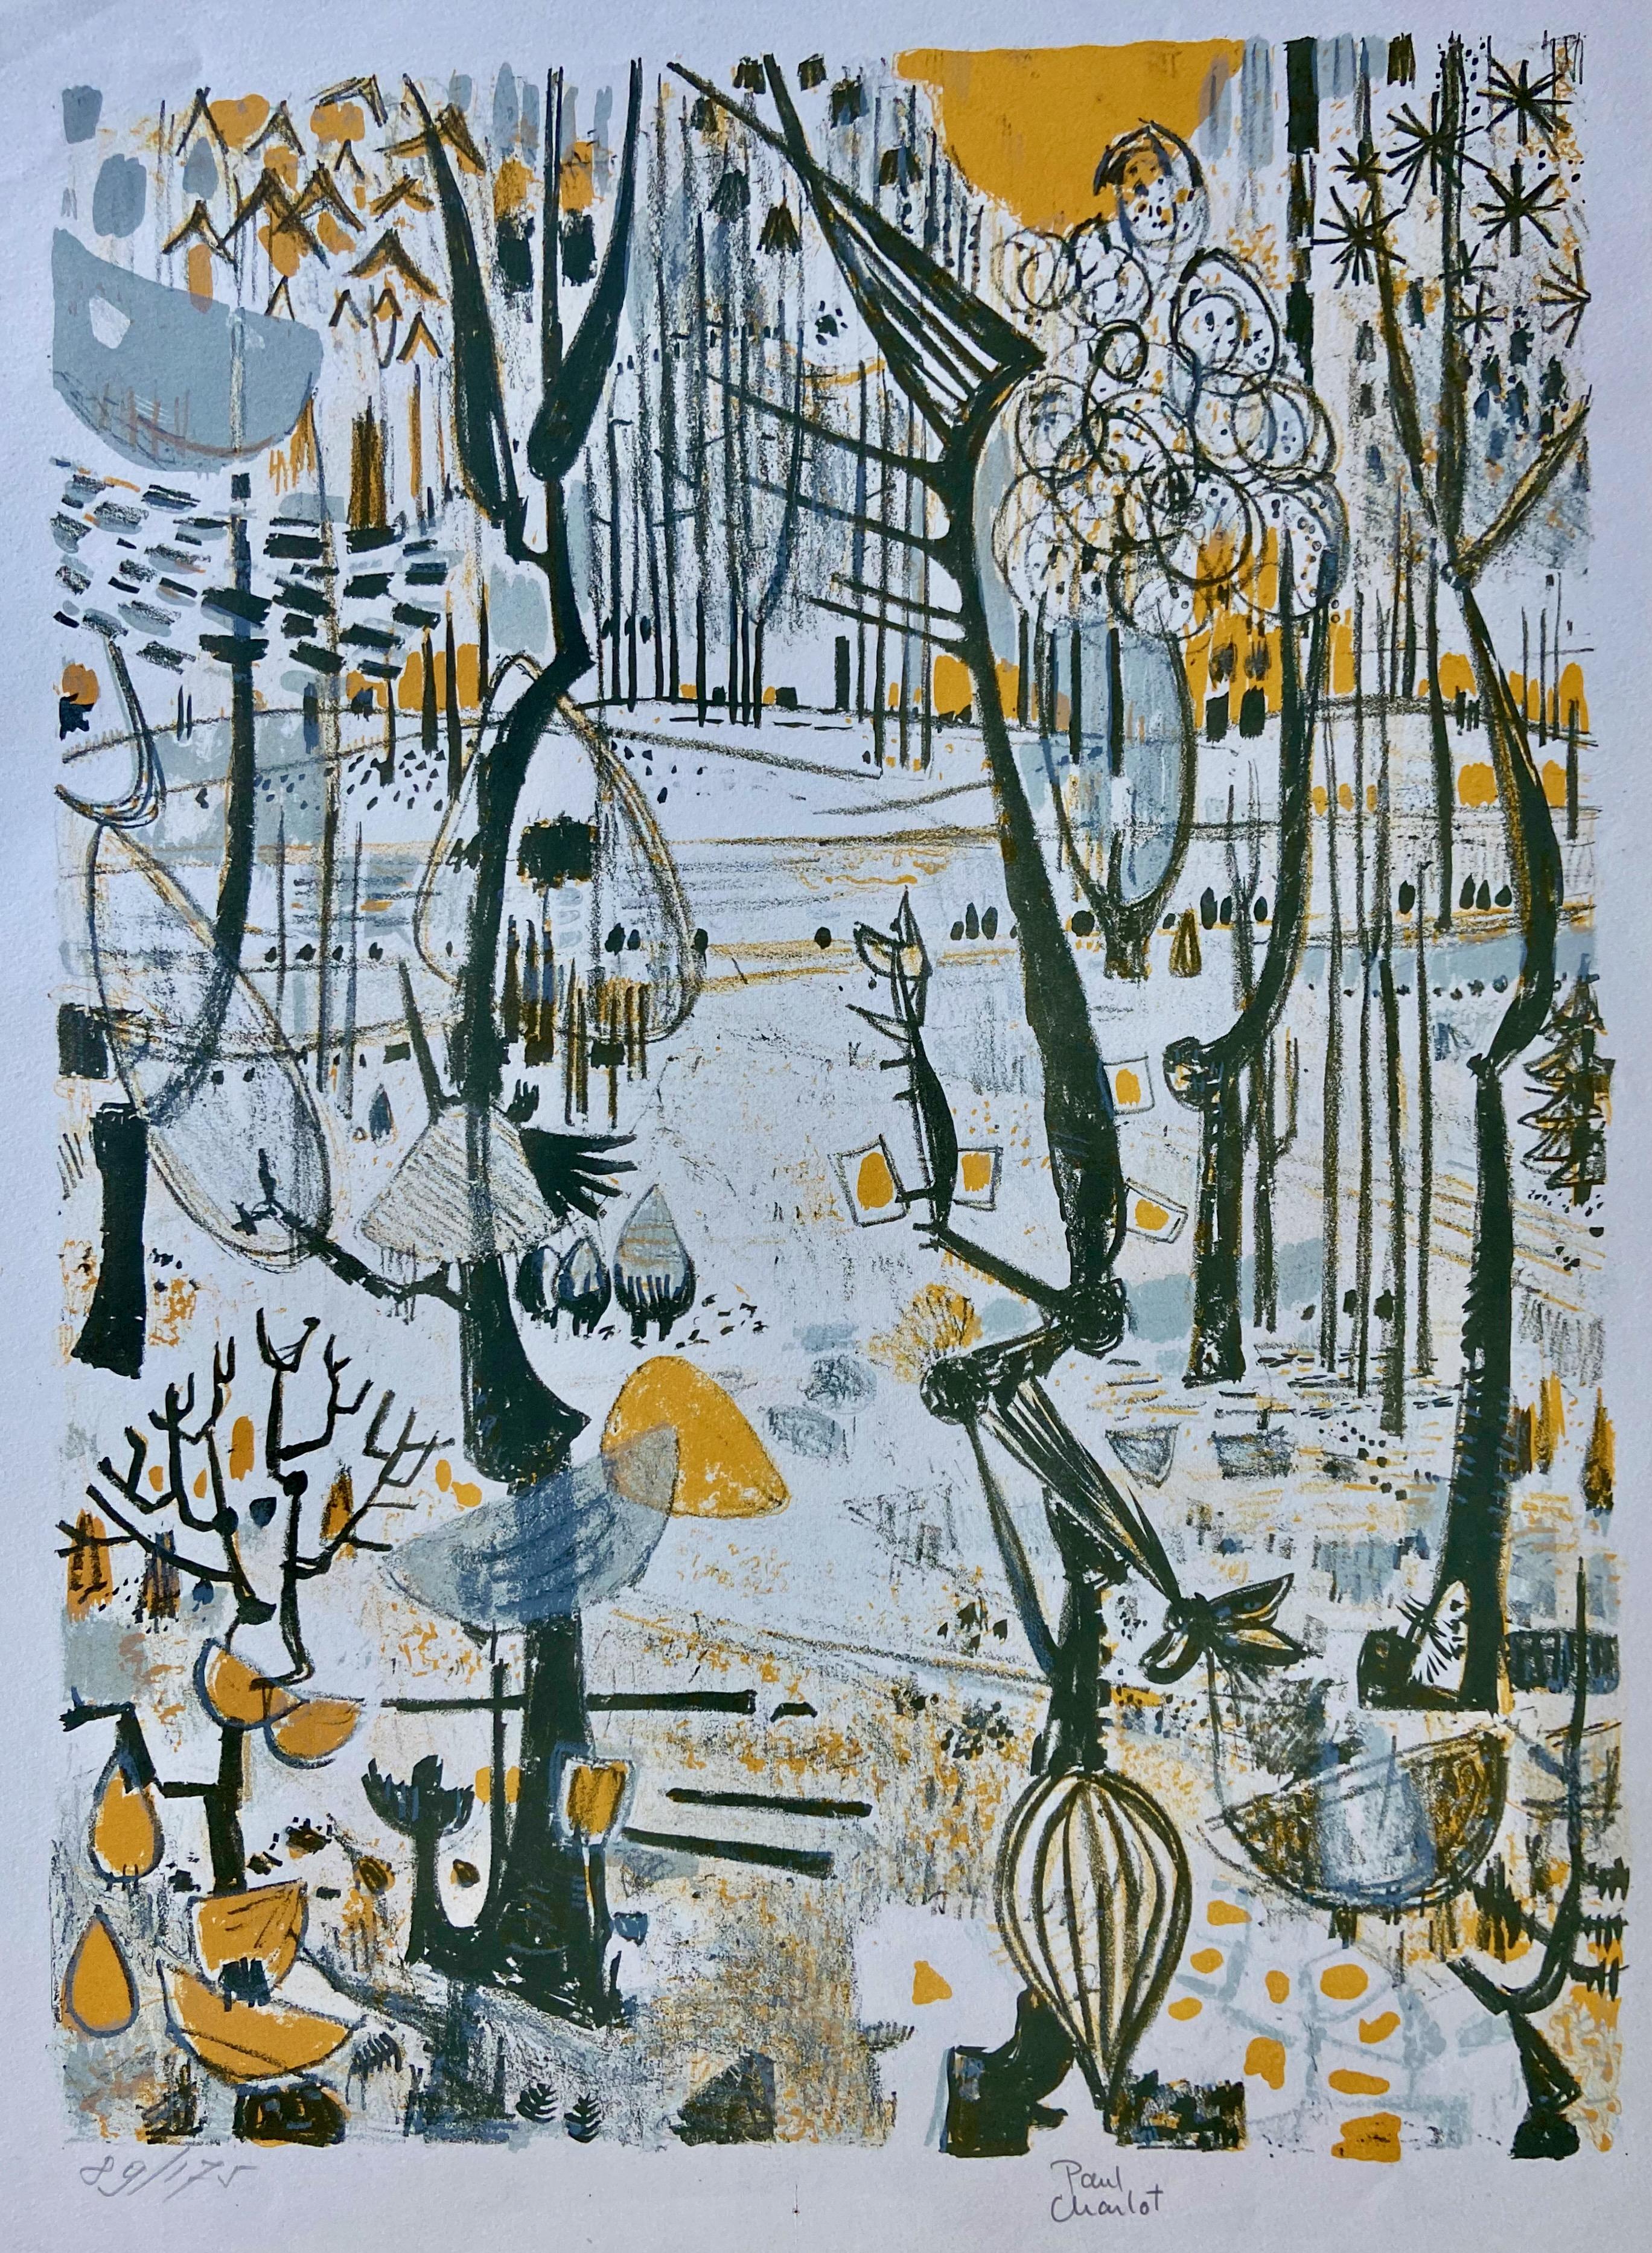 Paul Charlot Abstract Print - Whimsically rendered forest scene, original lithograph